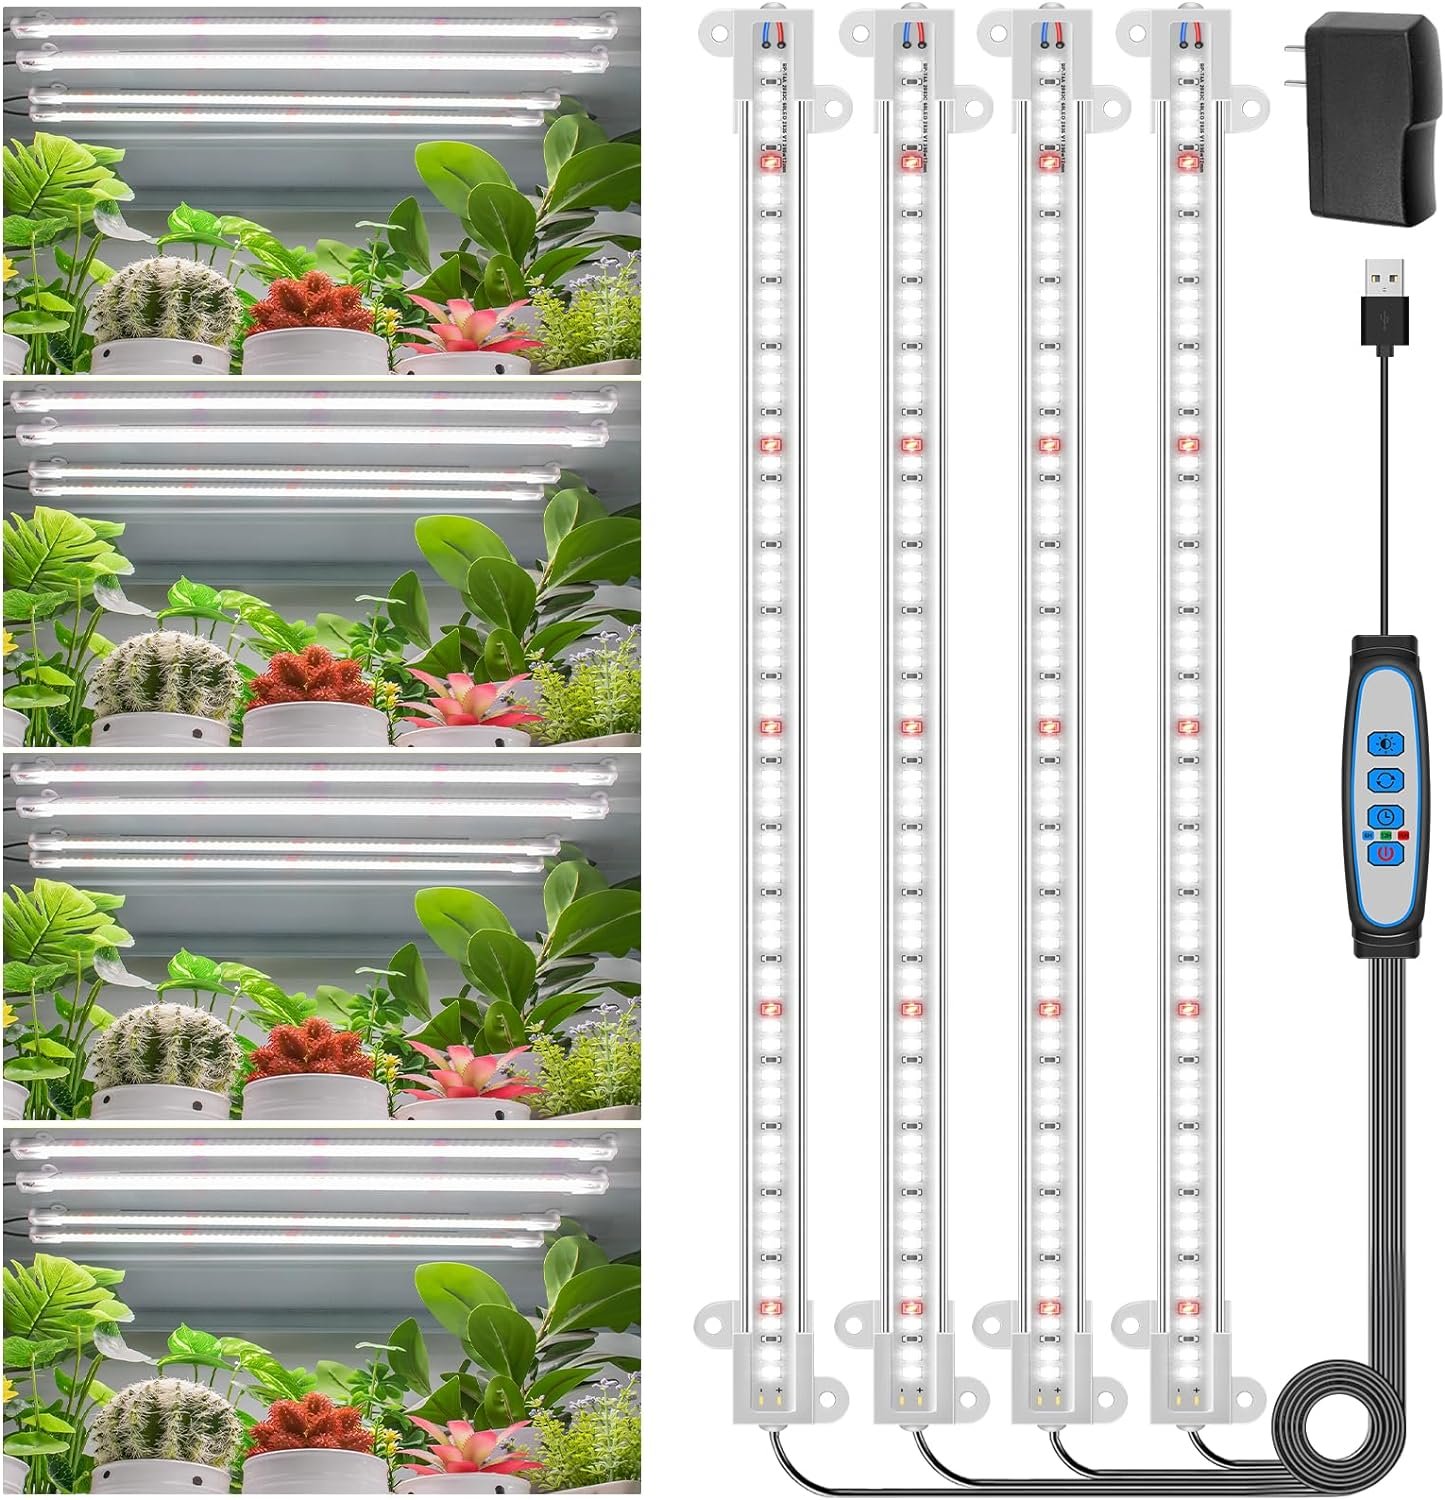 Wiaxulay LED Plant Grow Light Strips Review